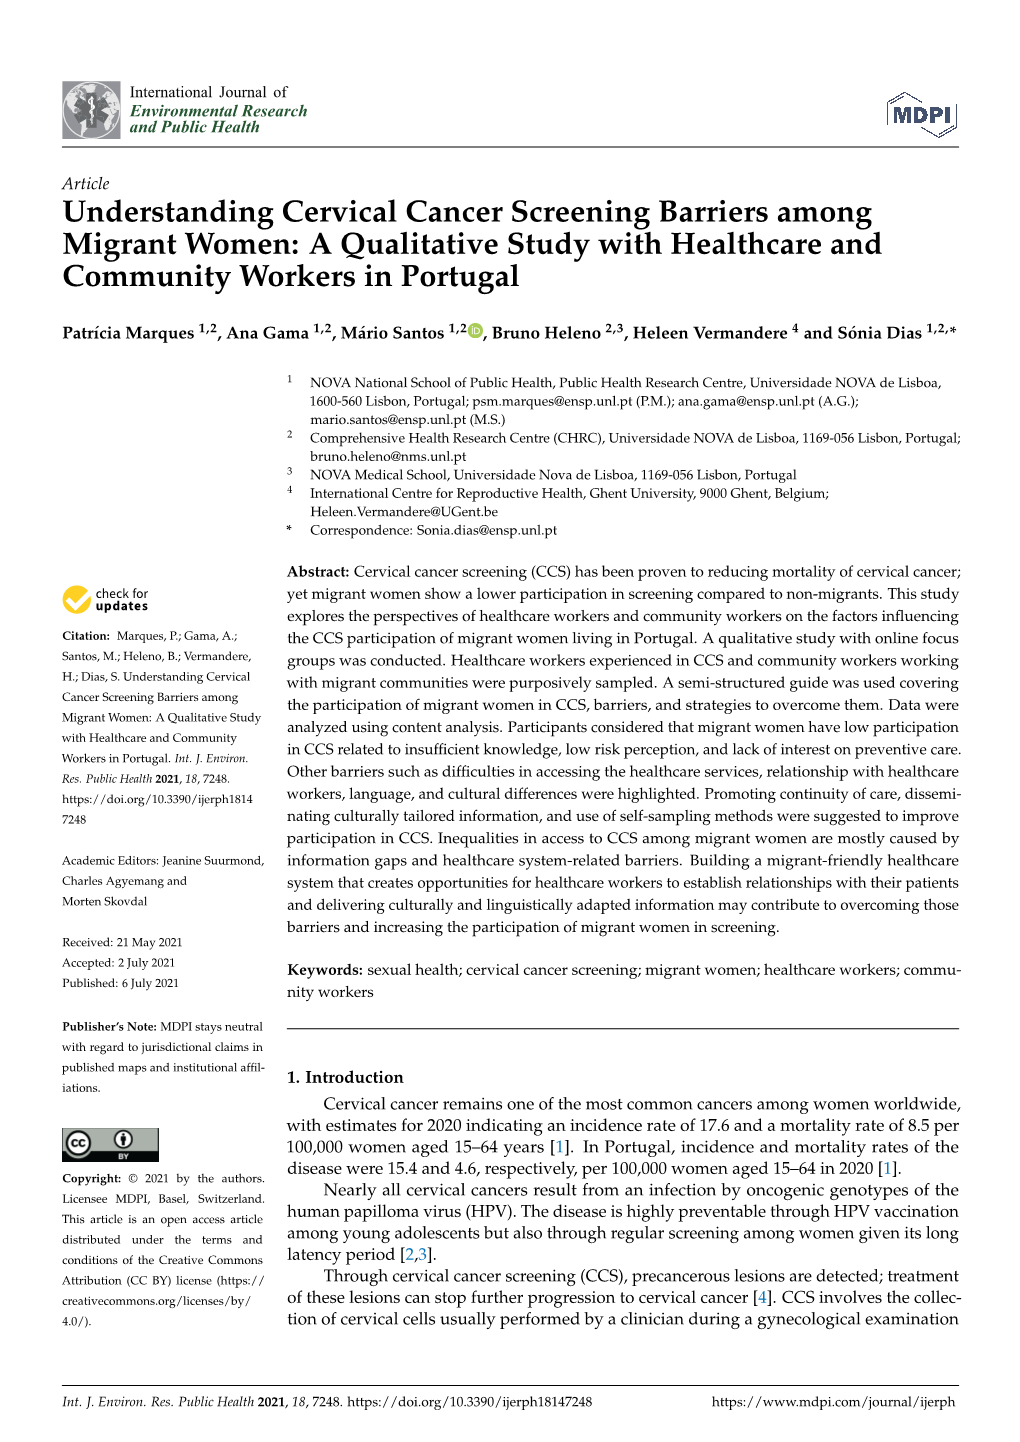 Understanding Cervical Cancer Screening Barriers Among Migrant Women: a Qualitative Study with Healthcare and Community Workers in Portugal